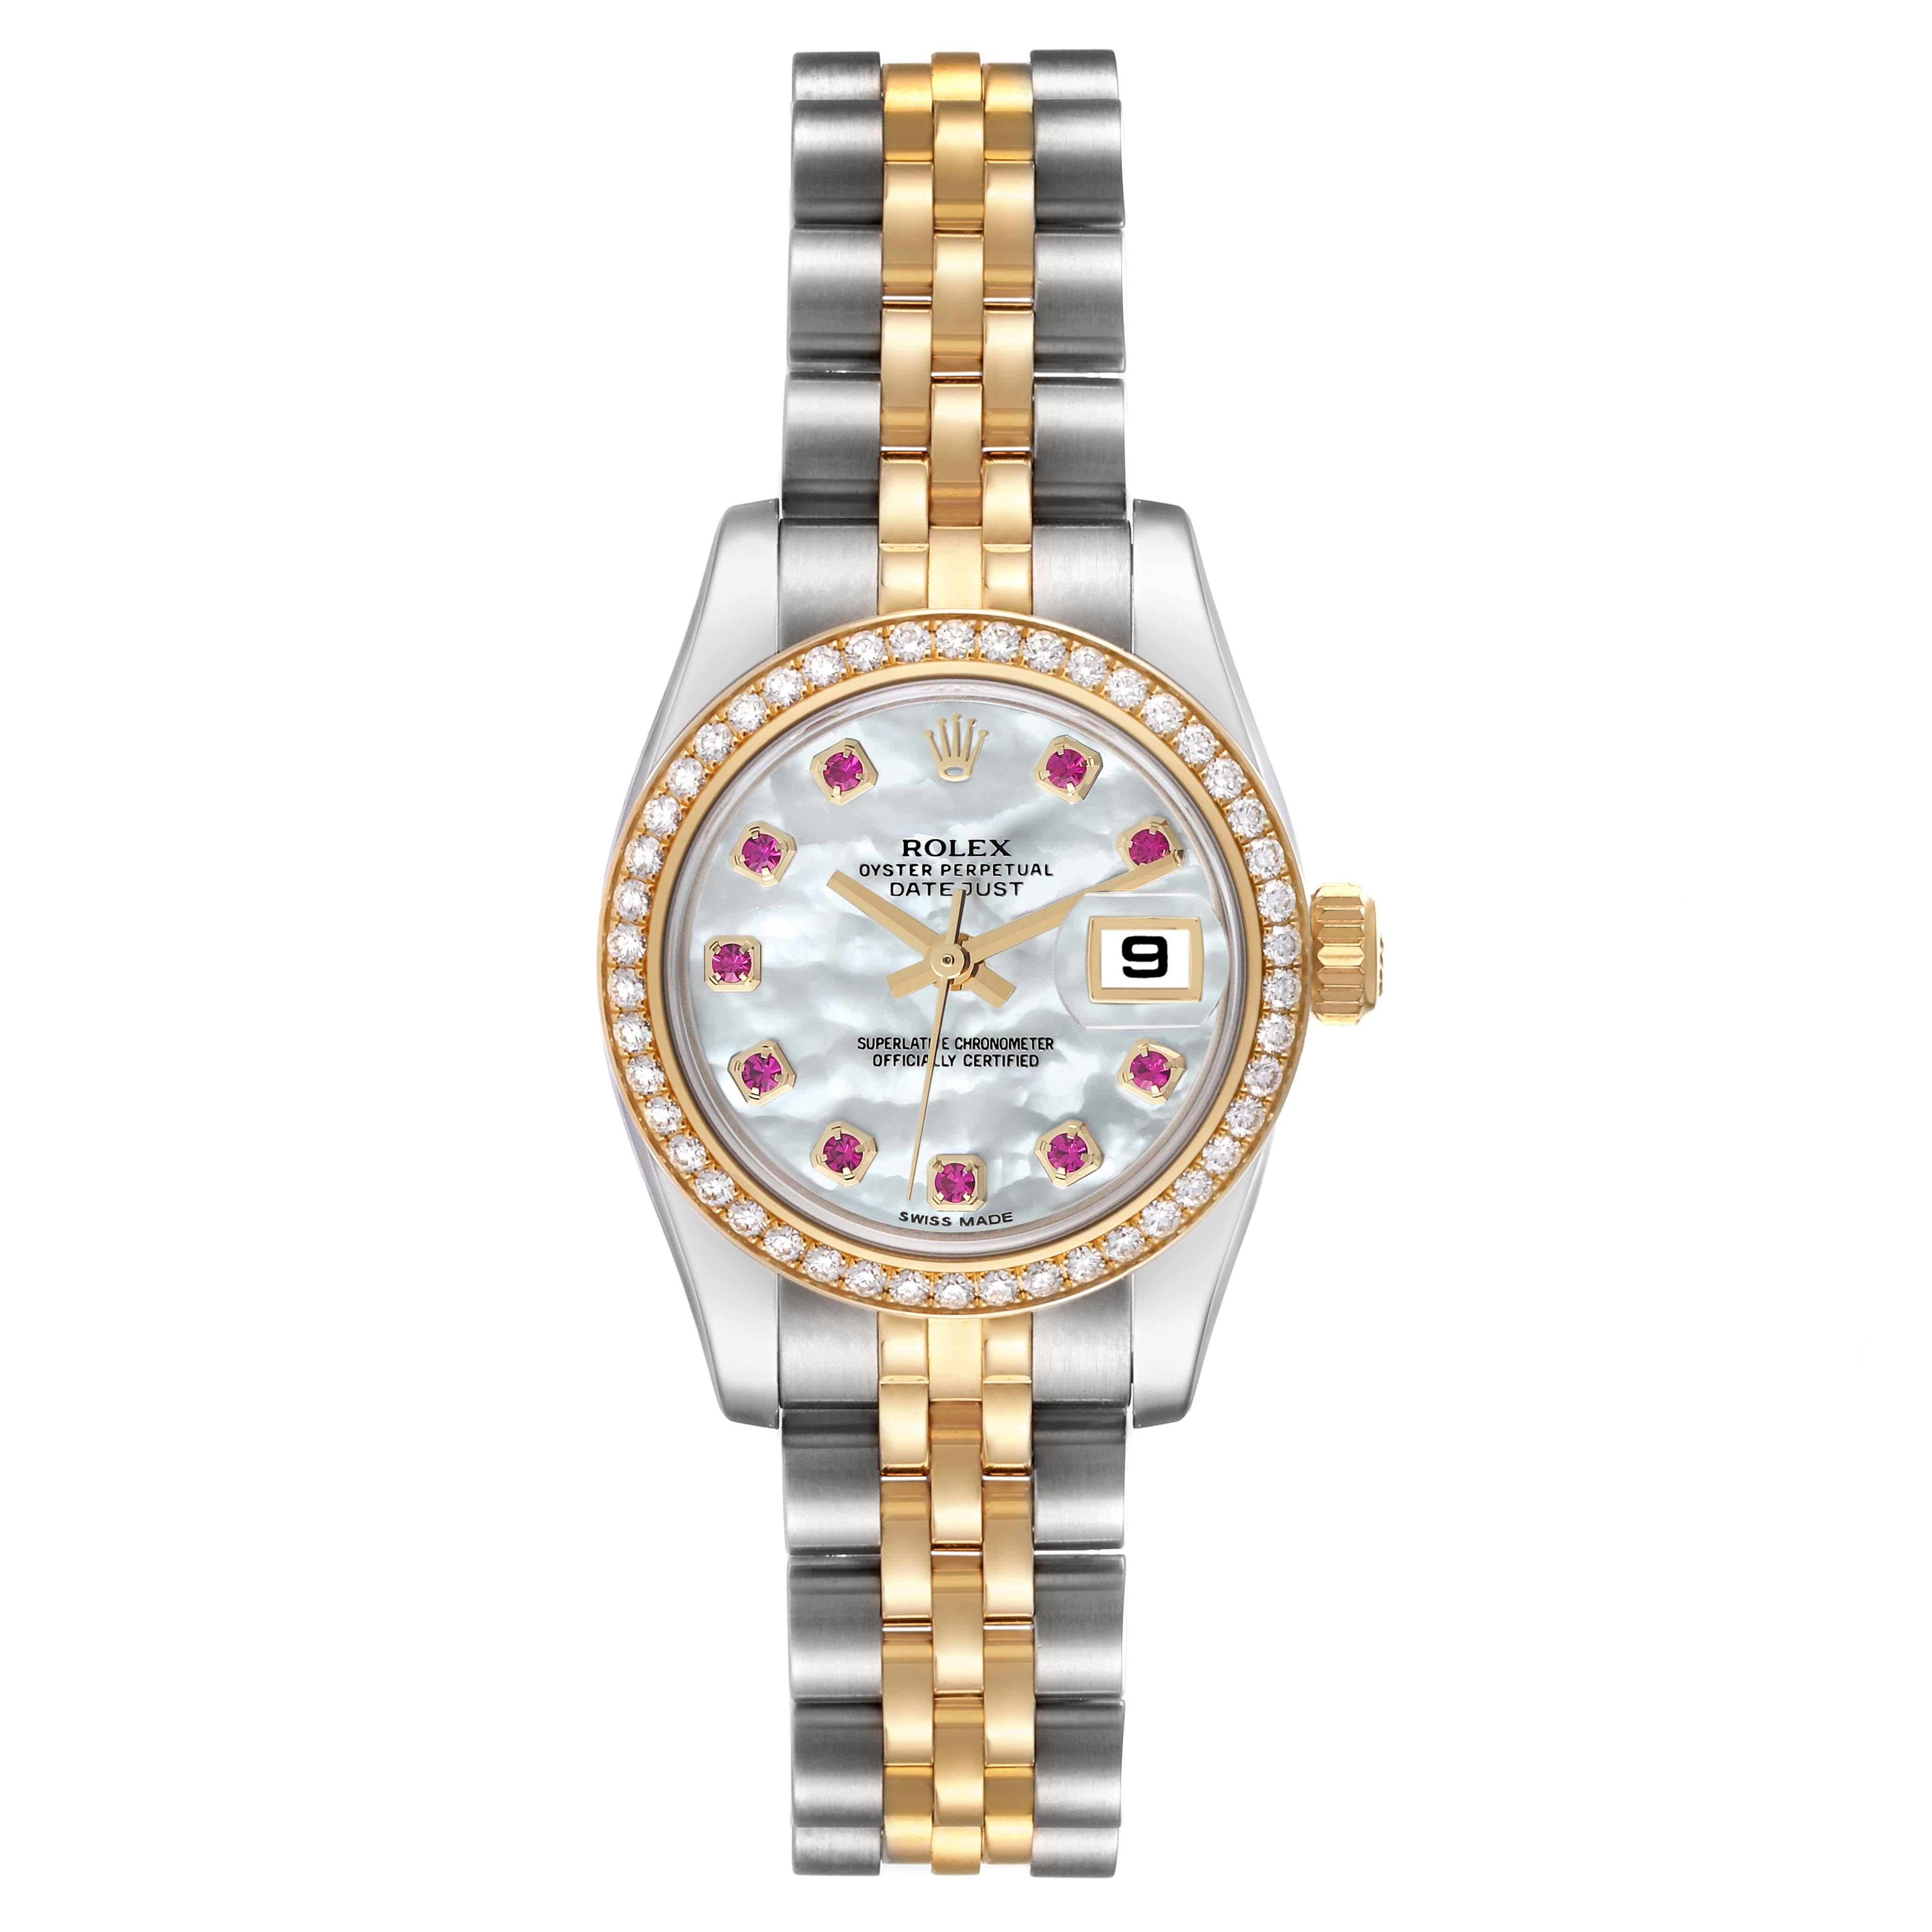 Rolex Datejust 26 Steel Yellow Gold Mother Of Pearl Ruby Diamond Ladies Watch 179383. Officially certified chronometer self-winding movement. Stainless steel oyster case 26.0 mm in diameter. Rolex logo on a 18K yellow gold crown. 18k yellow gold